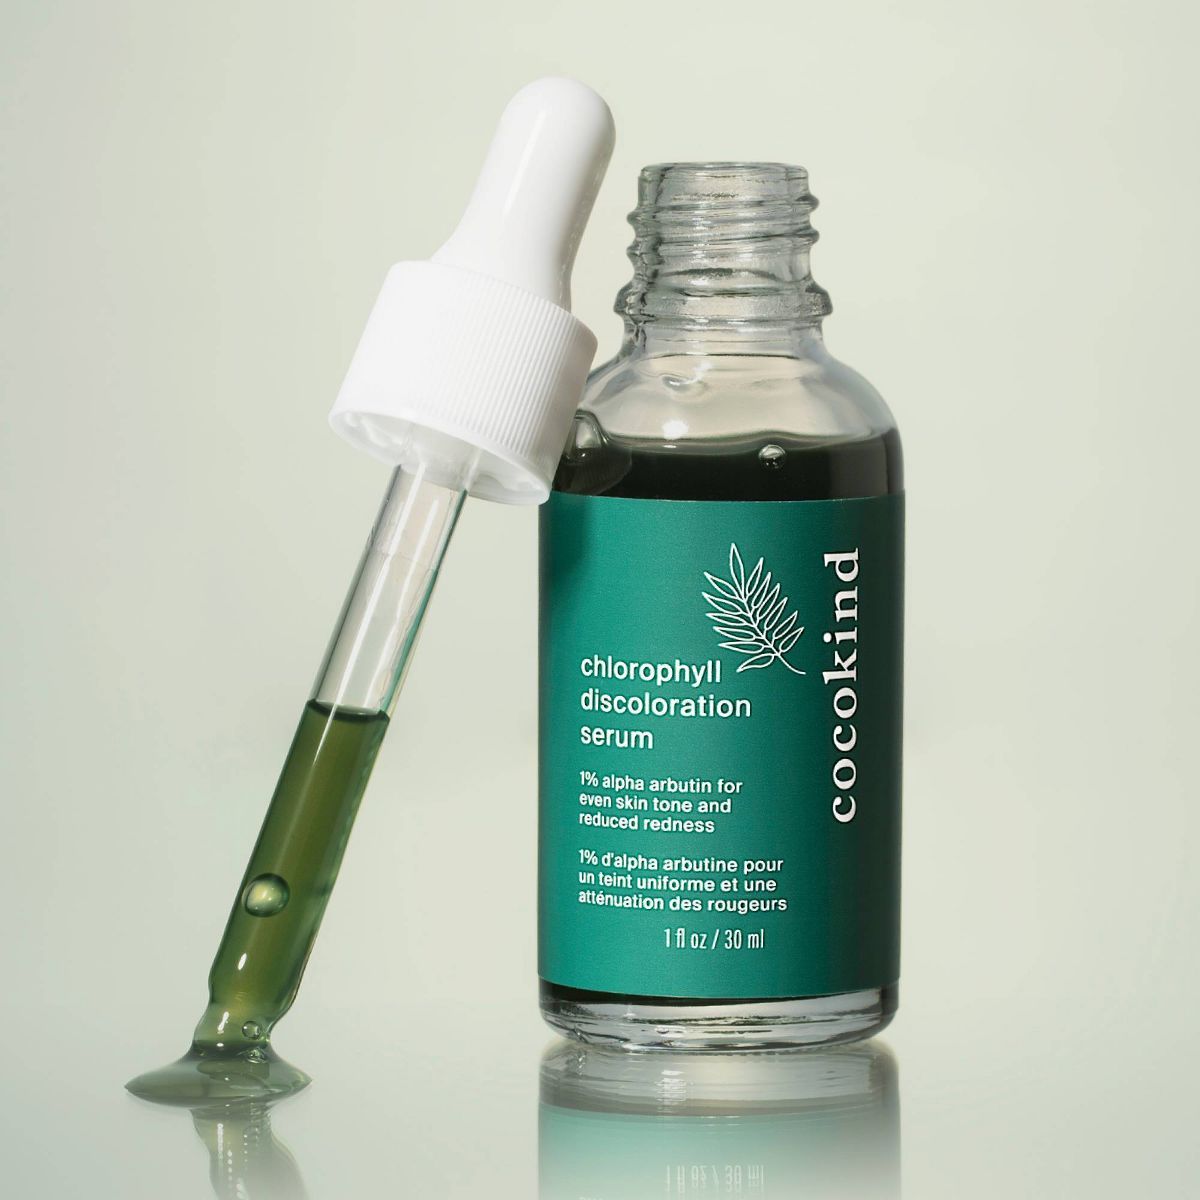 cocokind Chlorophyll Discoloration Face Serum - 1oz | Target